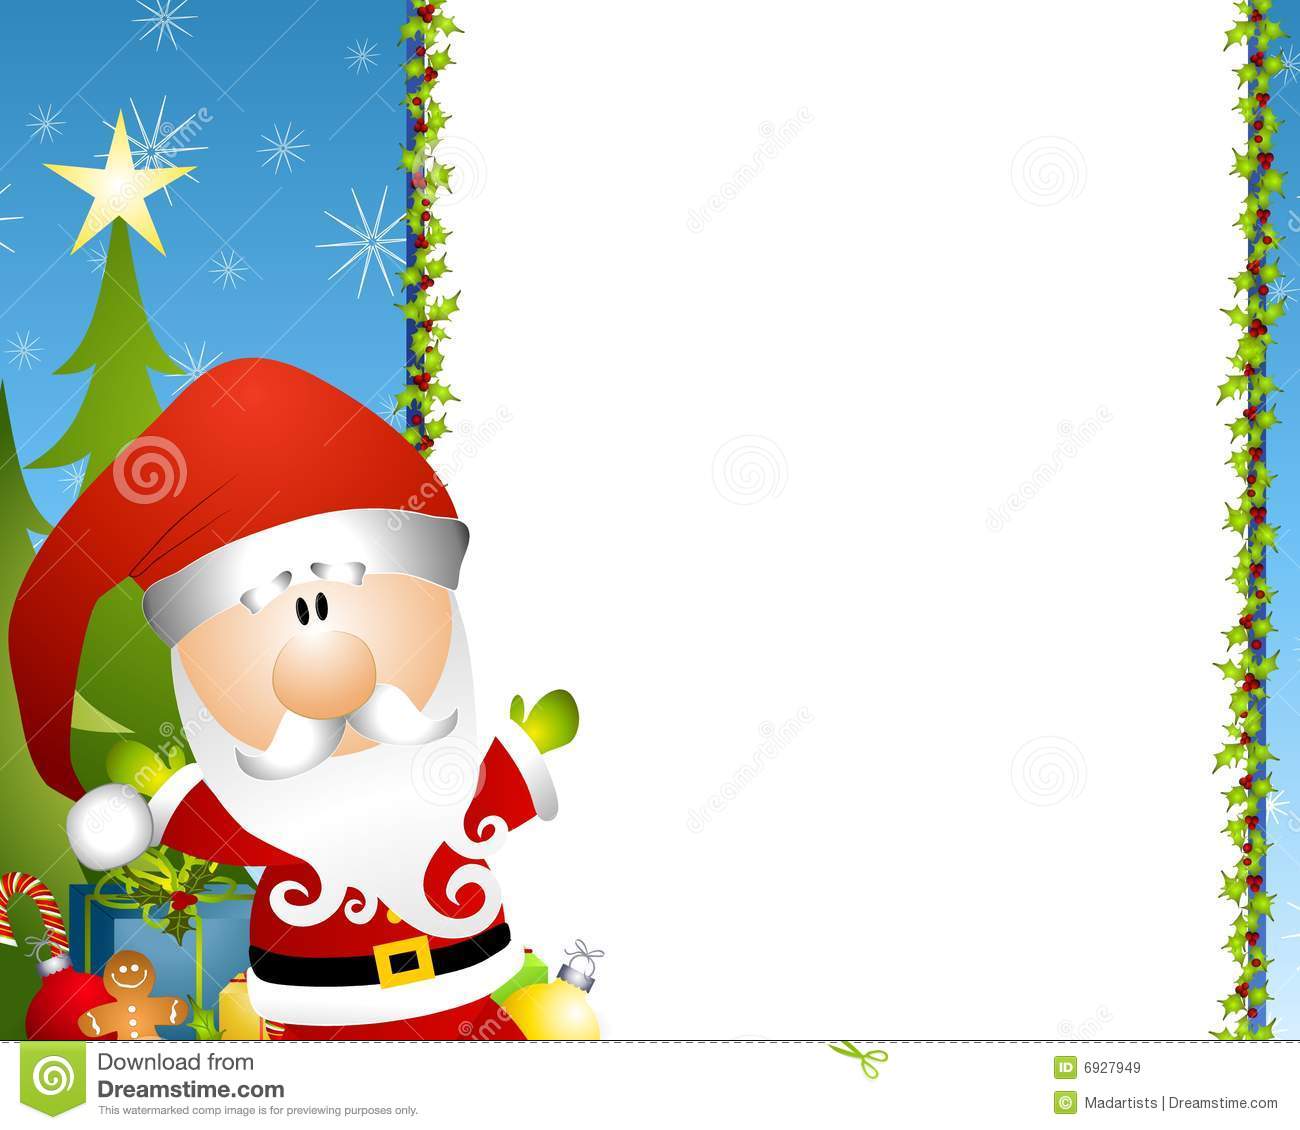 Illustration Featuring A Santa Claus With Holly Border And Presents